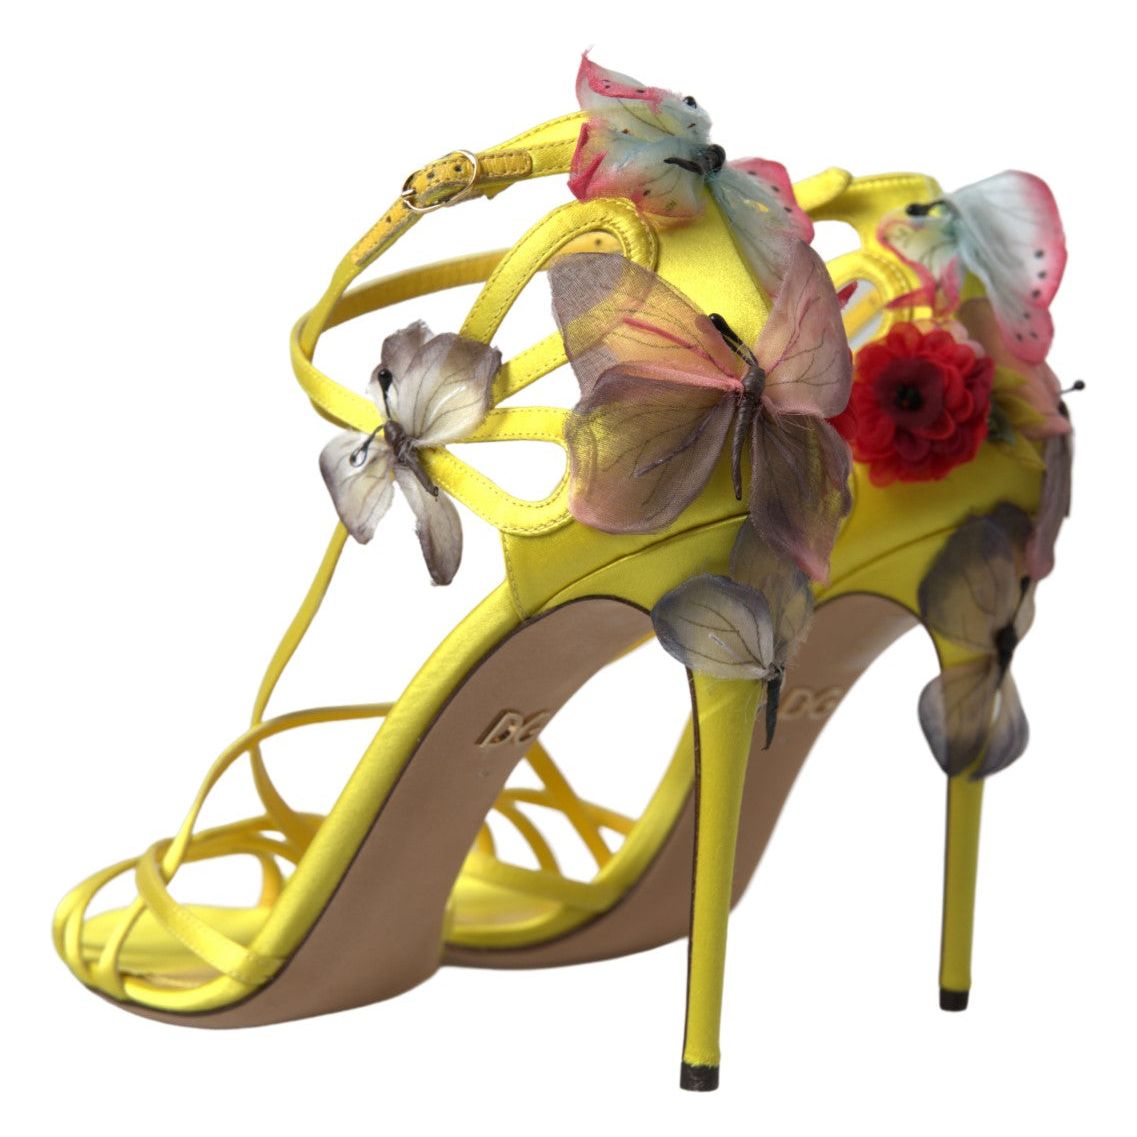 Dolce & Gabbana Enchanting Yellow Ankle Strap Sandals yellow-keira-butterfly-appliques-sandals 465A8934-Large-d2655b5e-bc6.jpg